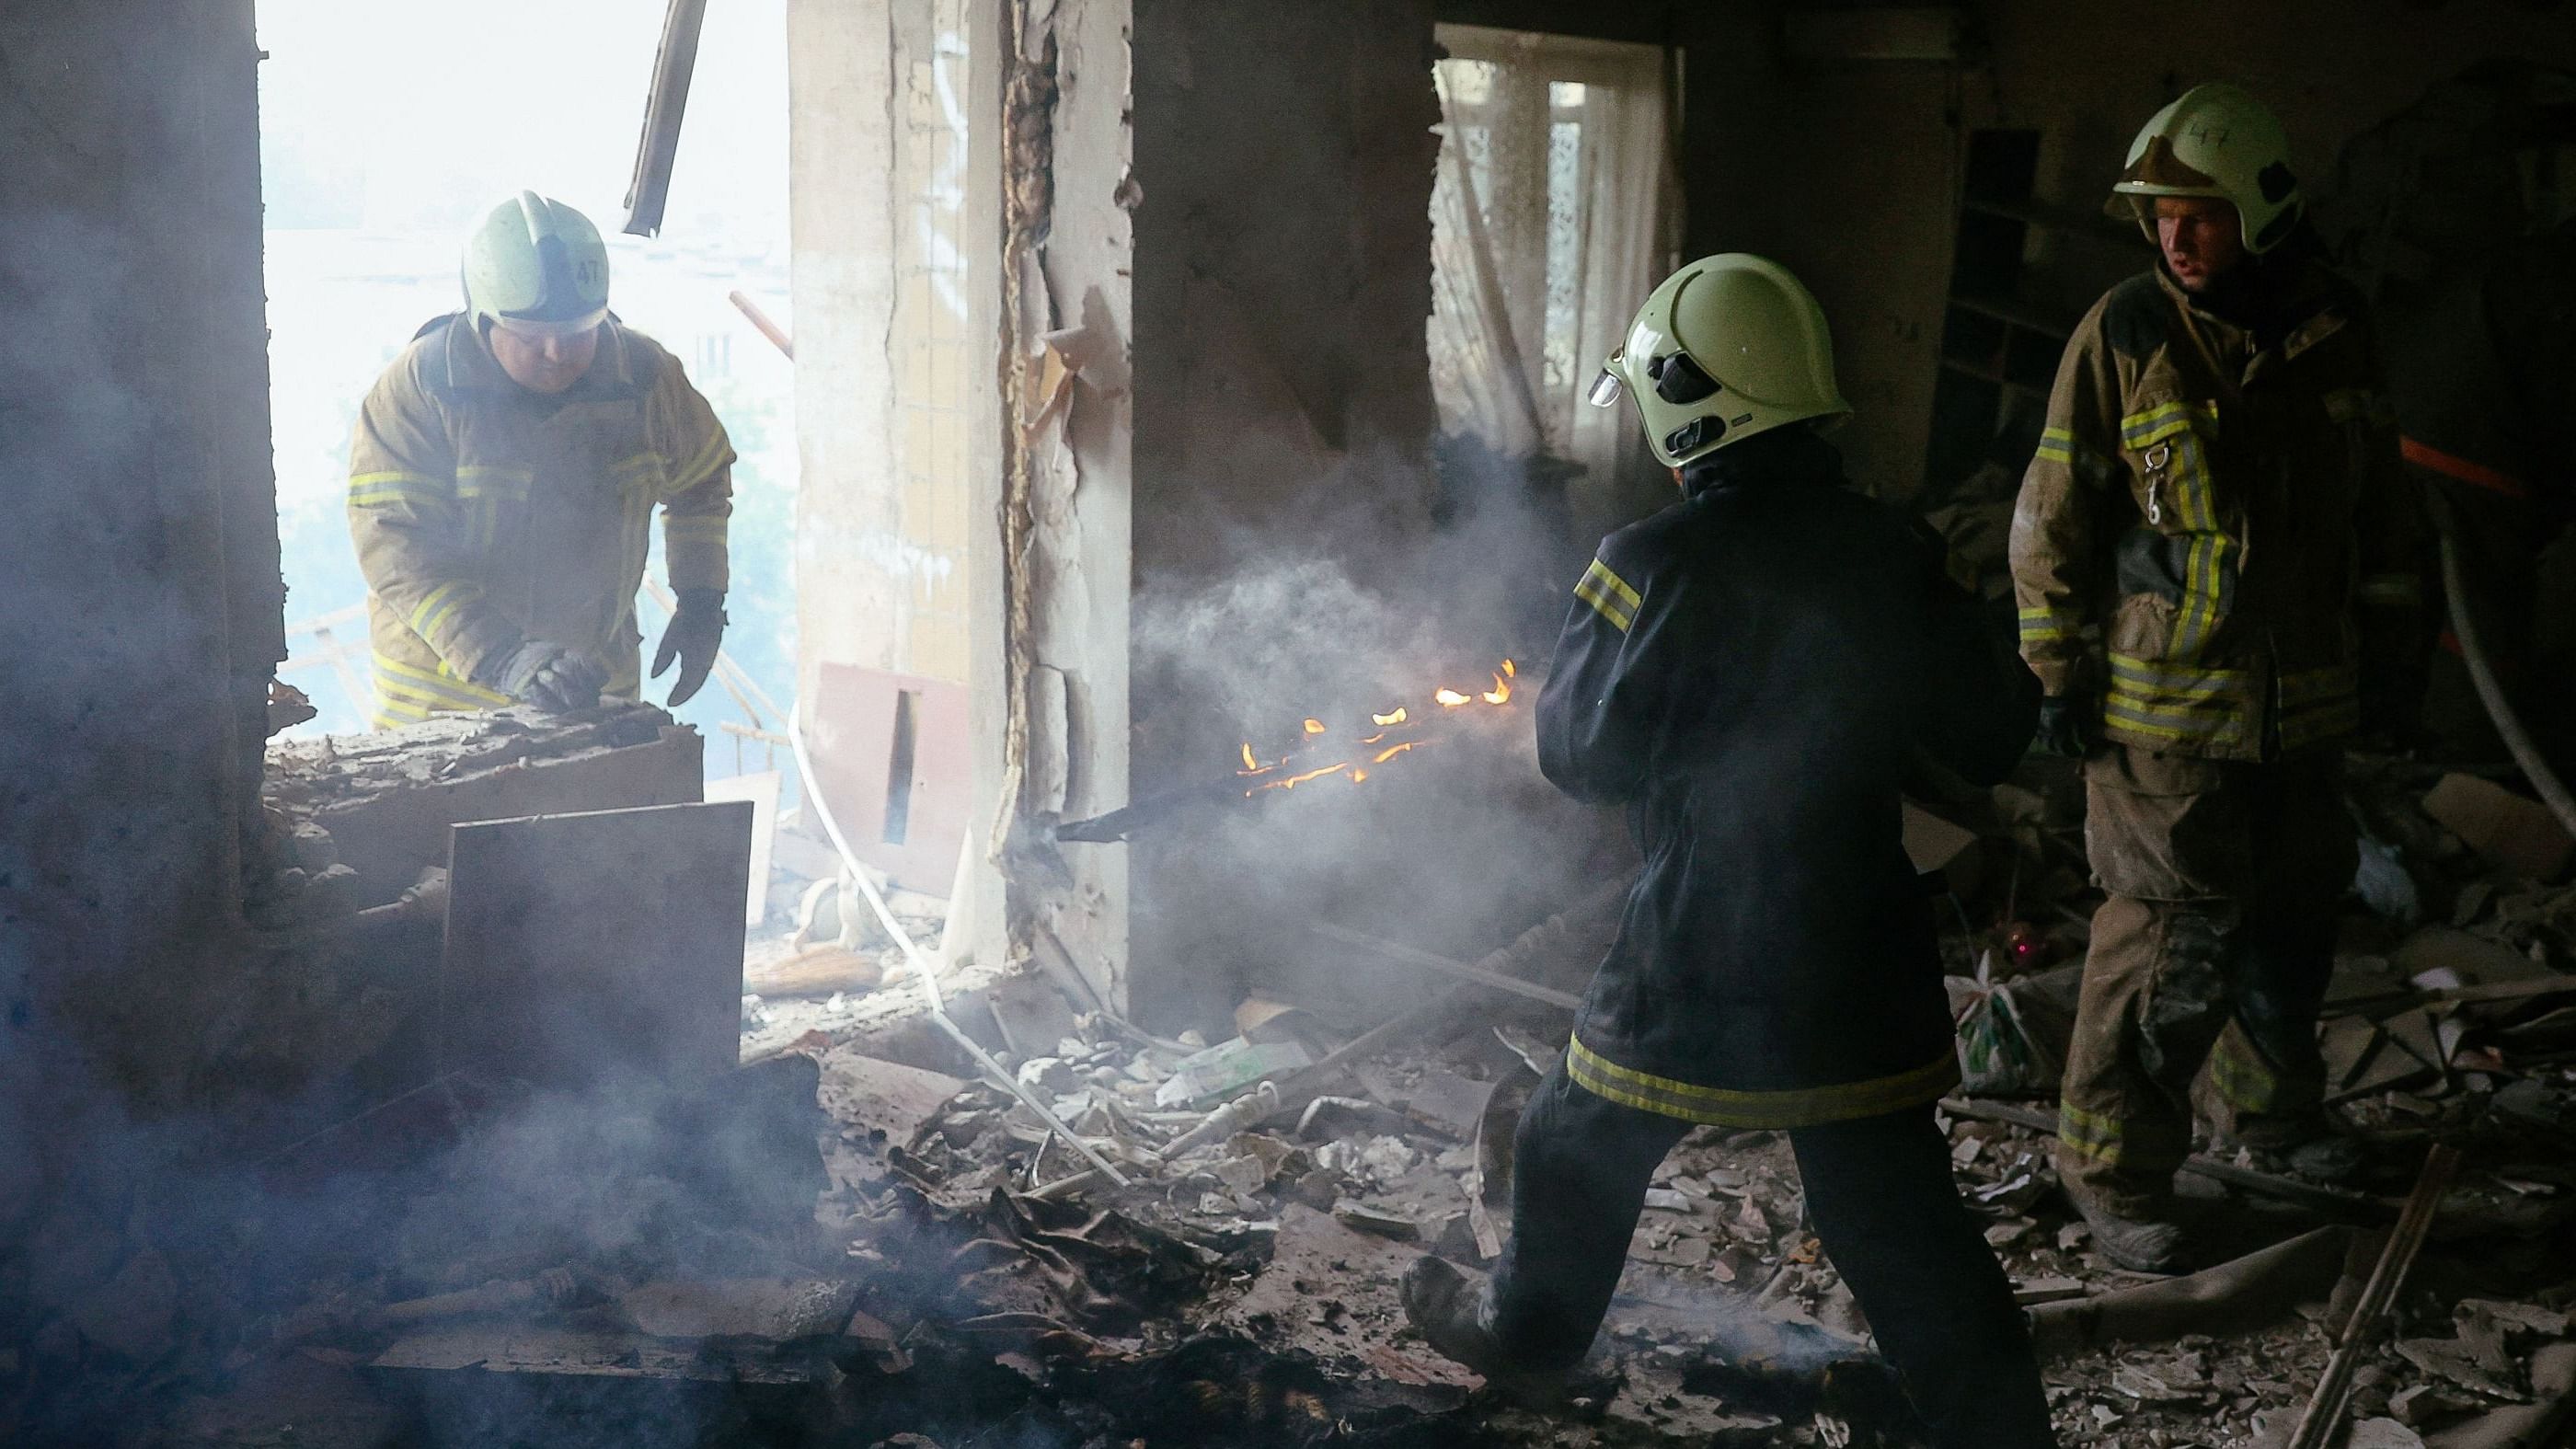 Firefighters put out the fire in a destroyed house following a shelling in Bakhmut, Donetsk region on August 13, 2022, amid the Russian military invasion of Ukraine. Credit: AFP Photo